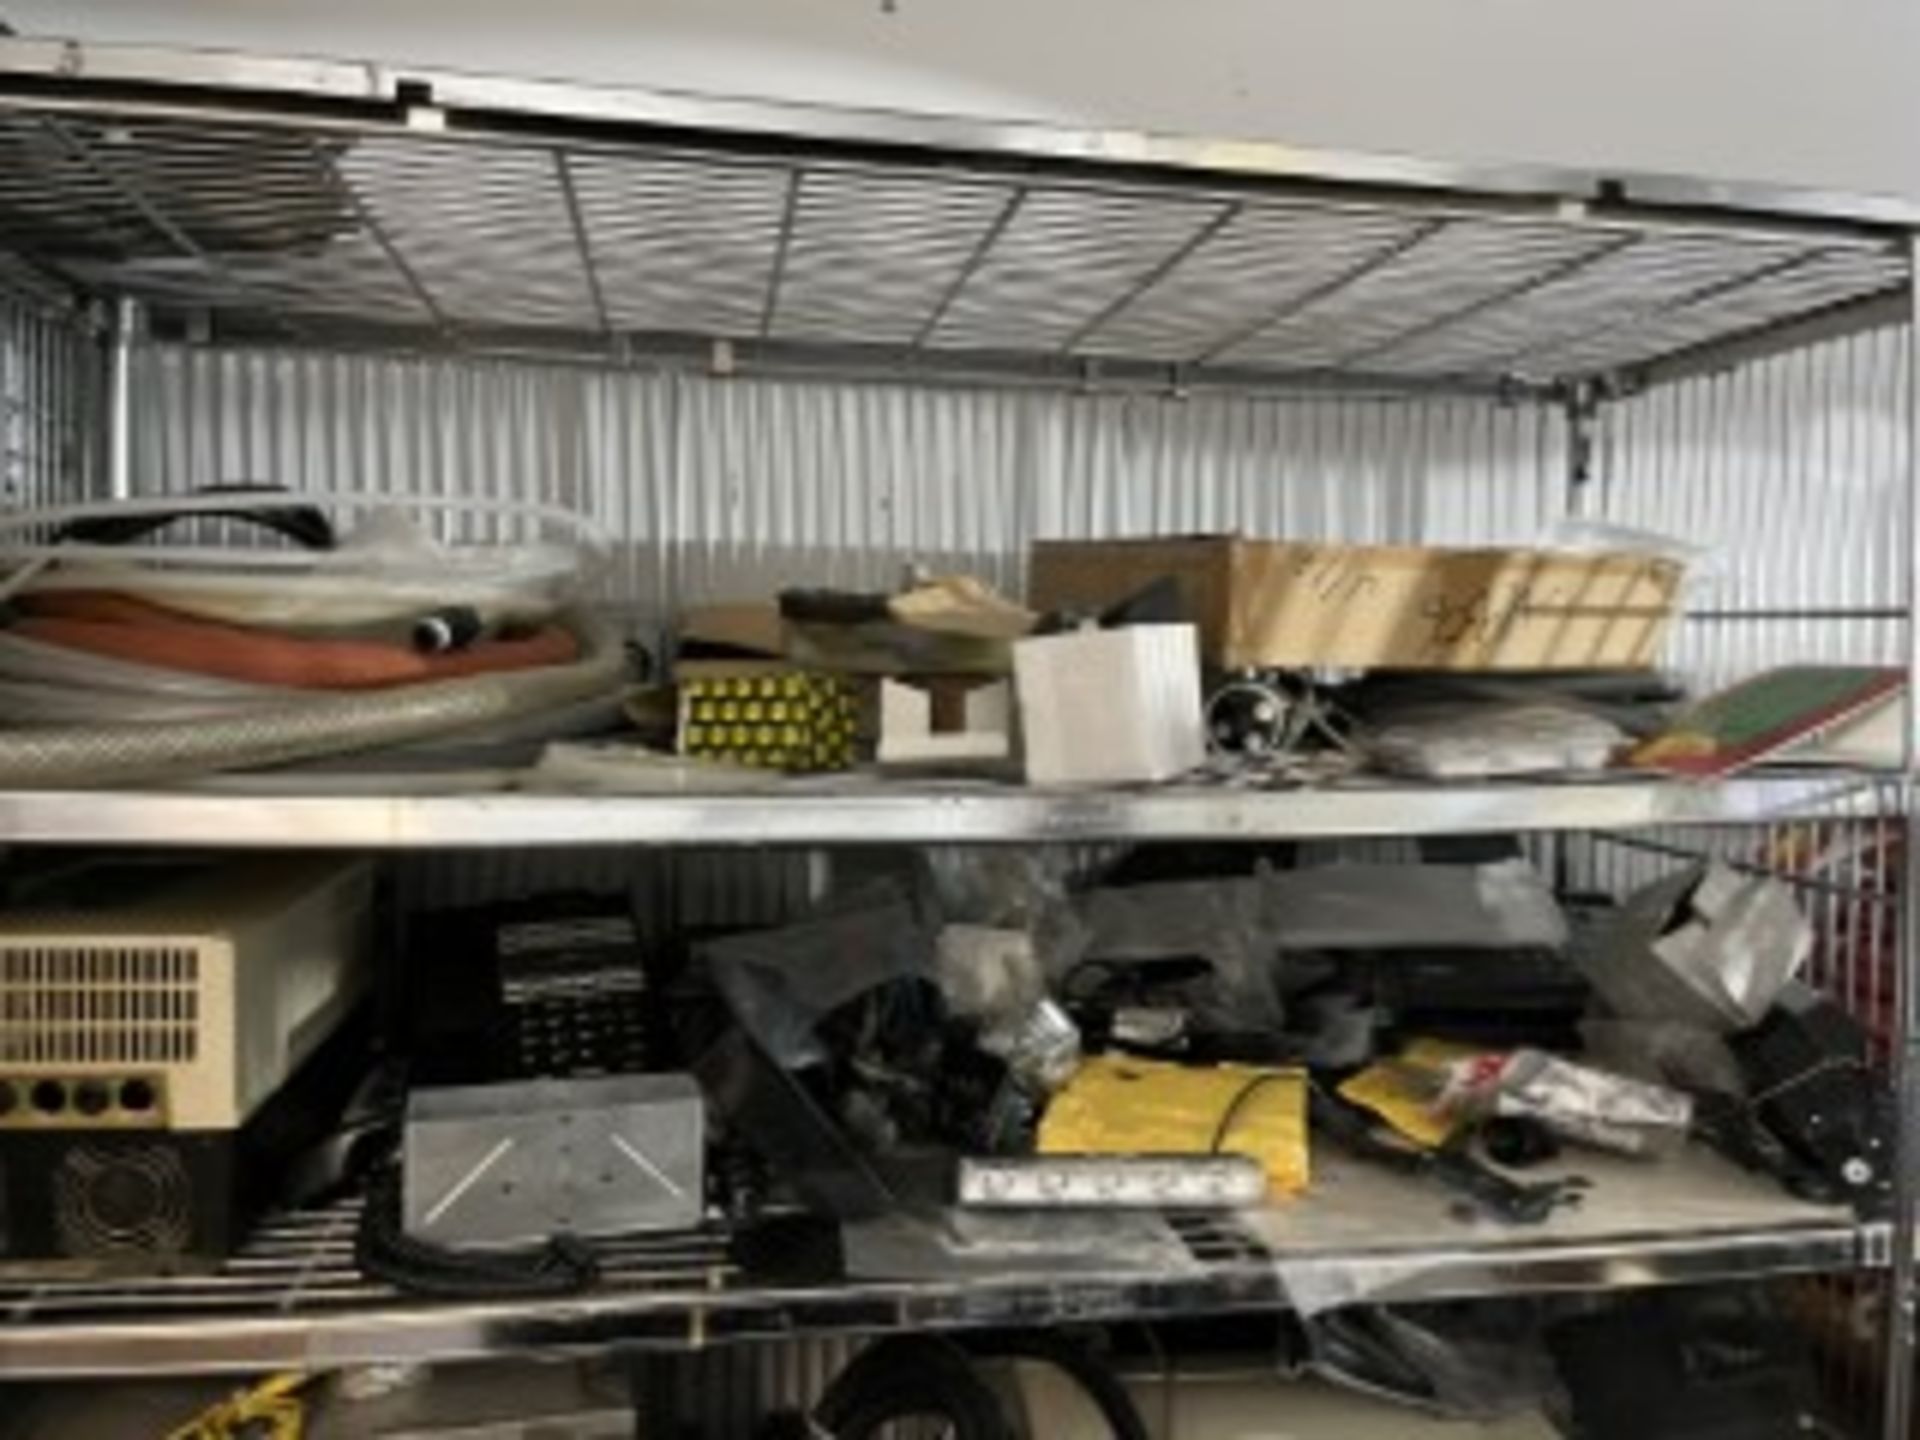 LOT CONTENTS OF CAGE - PRINTERS, ANALYZERS, LIGHTING, HOSES, ETC - Image 2 of 5